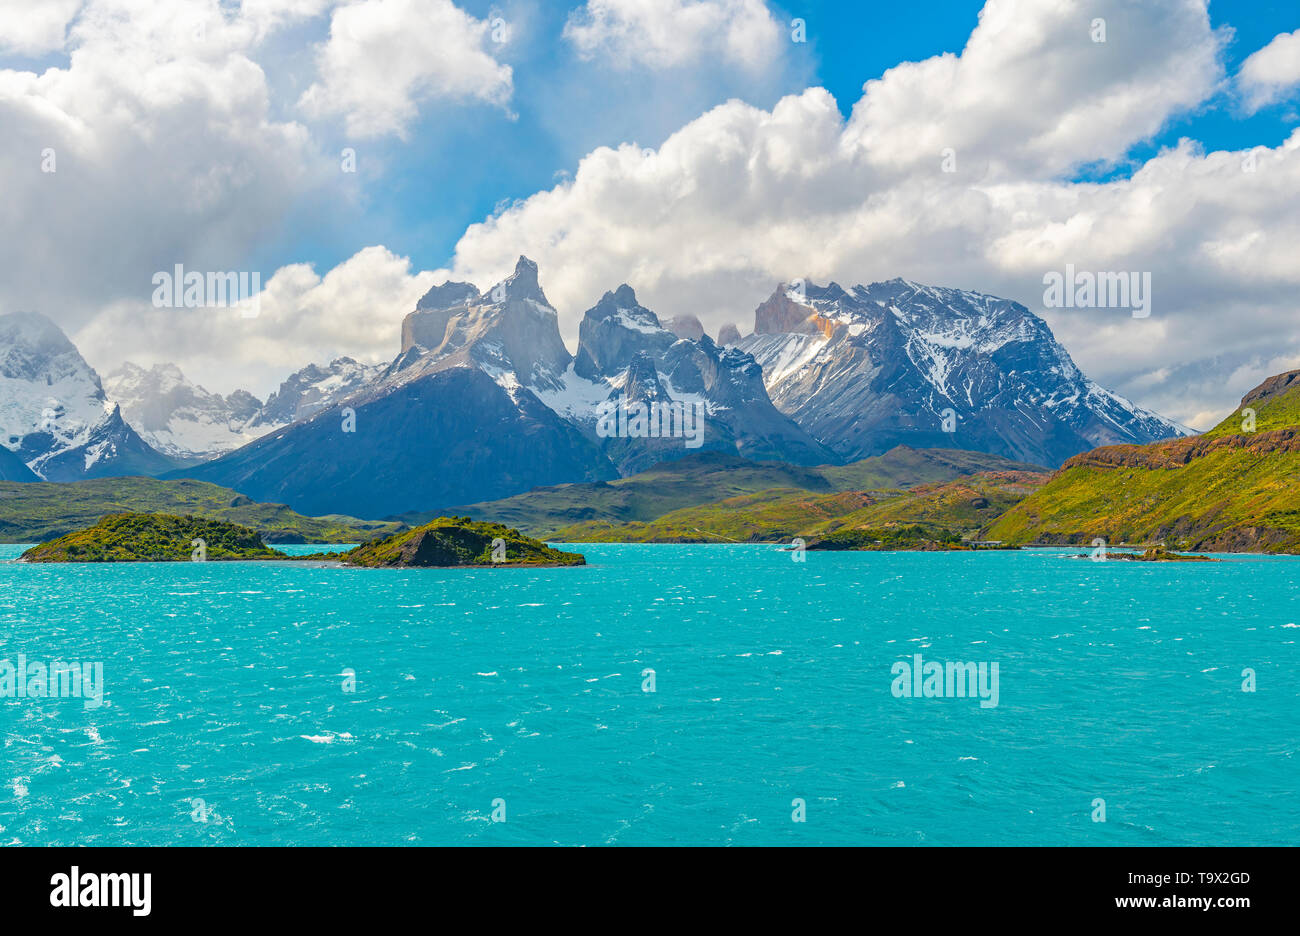 Turquoise glacier waters of Pehoe Lake, the Cuernos and Torres del Paine Andes peaks, Torres del Paine national park, Puerto Natales, Patagonia, Chile. Stock Photo